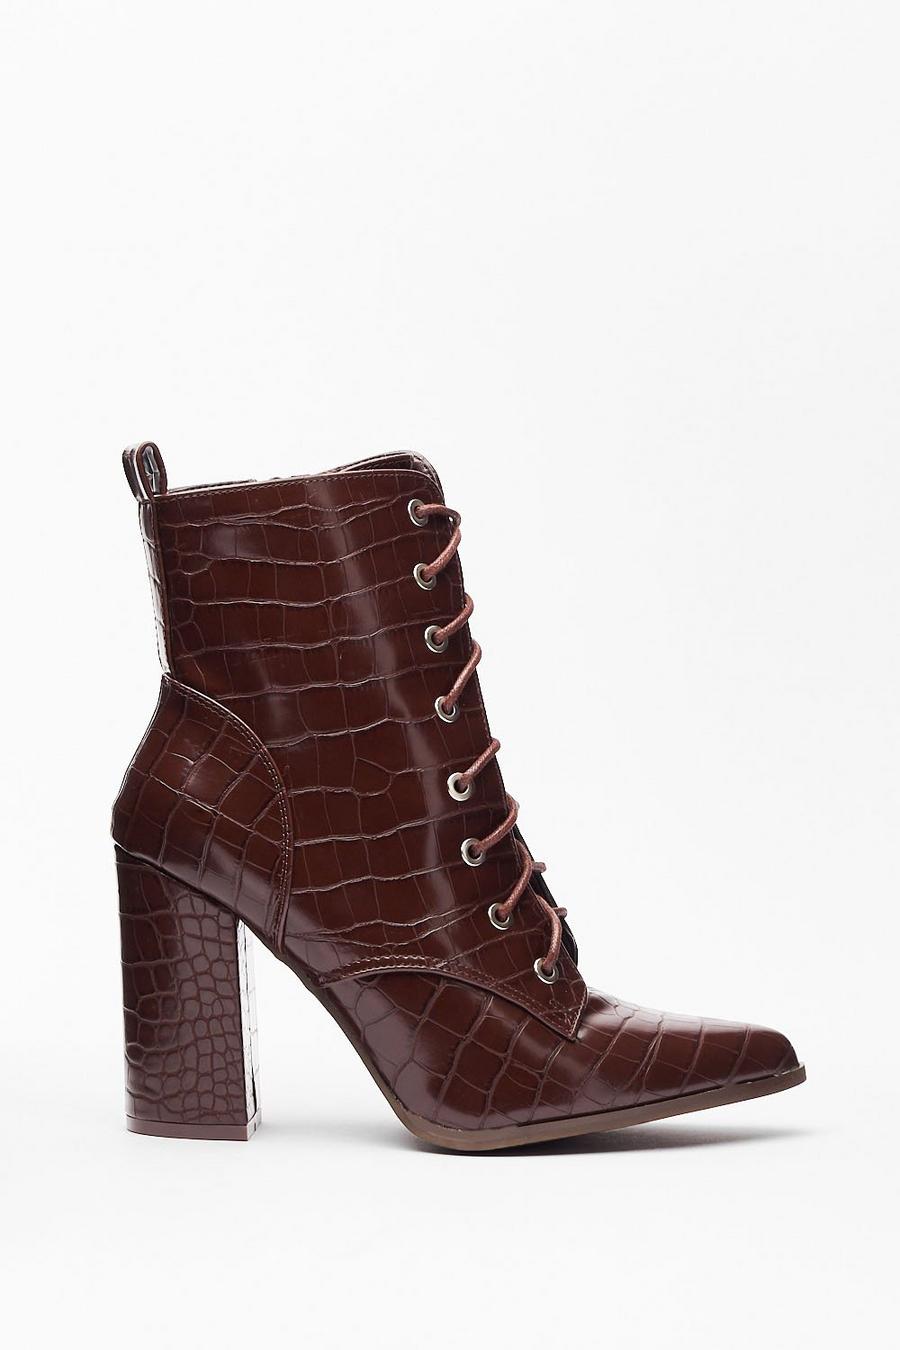 Chocolate brown Croc Embossed Lace Up Heeled Boots